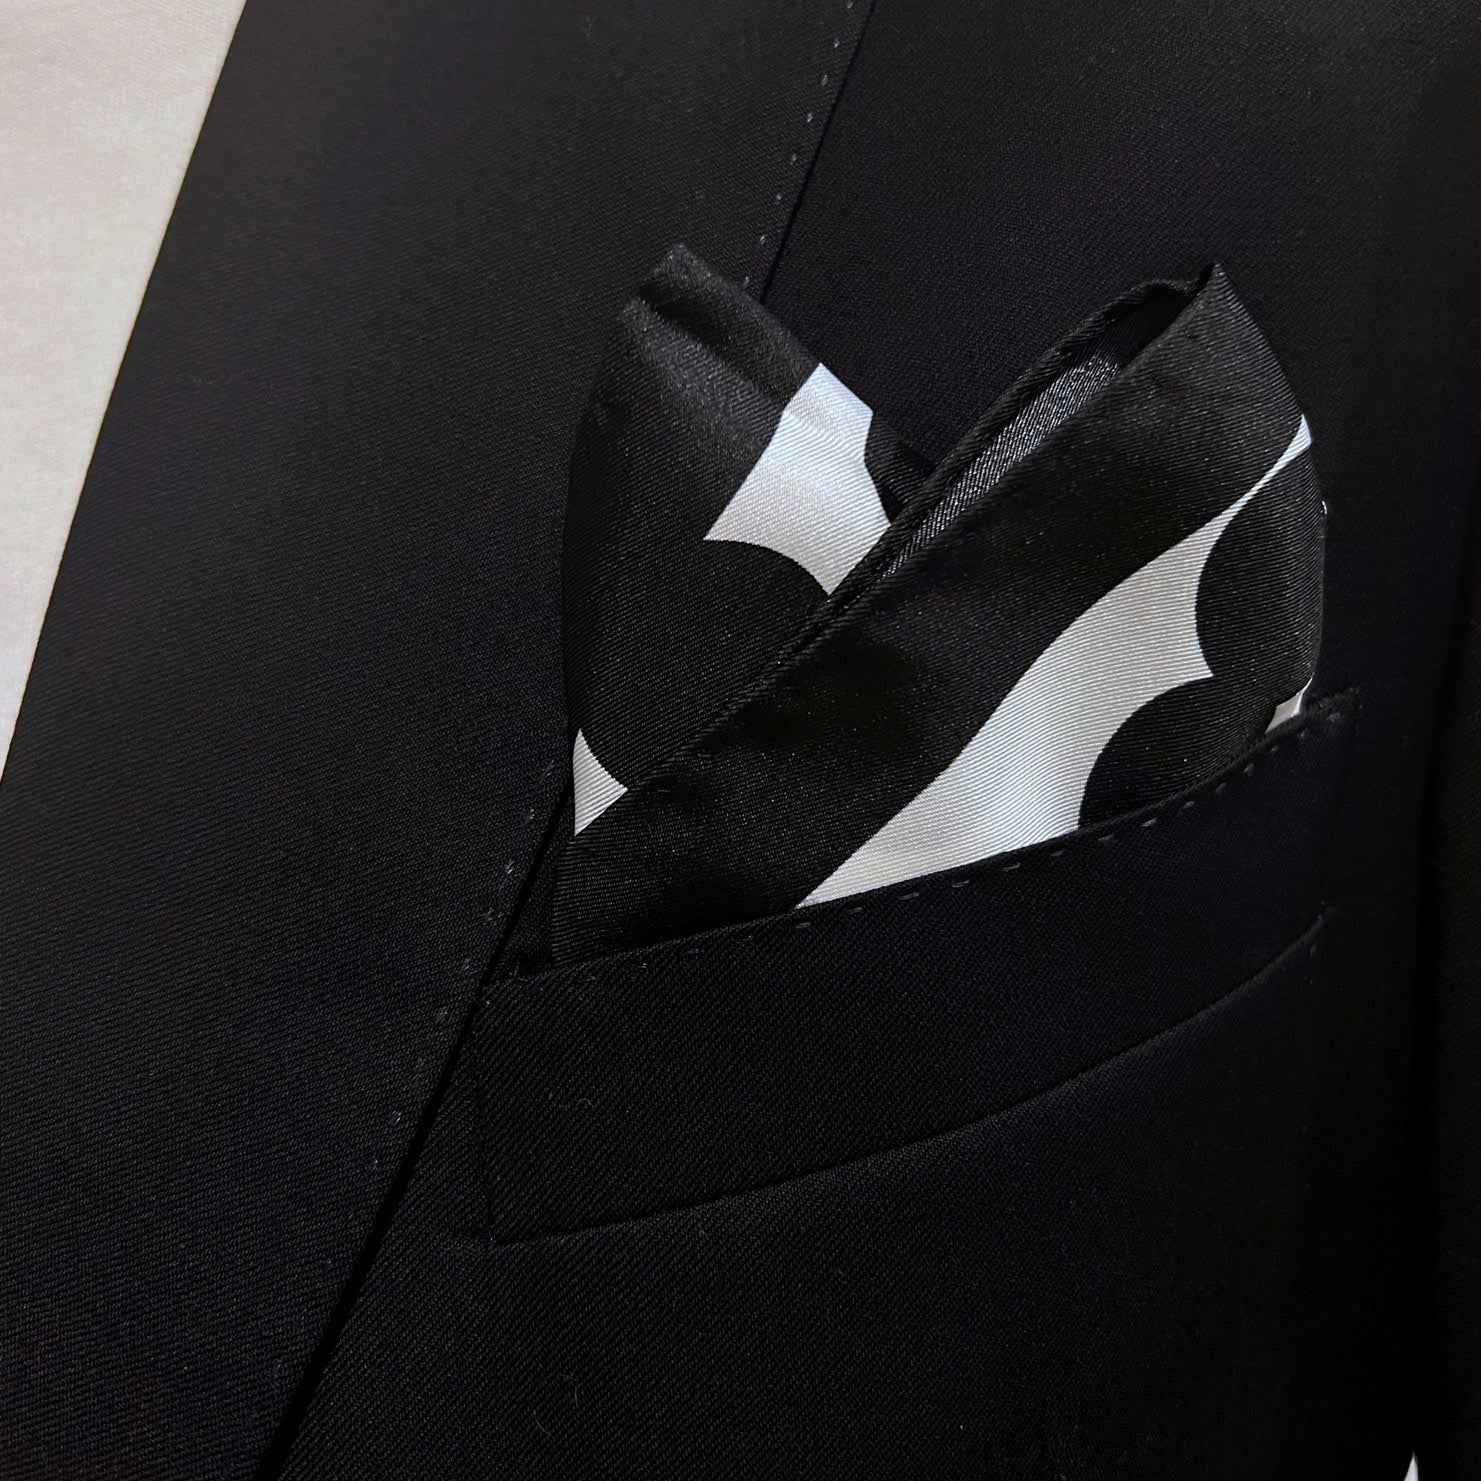 Close-up of black spotted 'Chaney' silk pocket square in breast pocket of dark suit jacket.